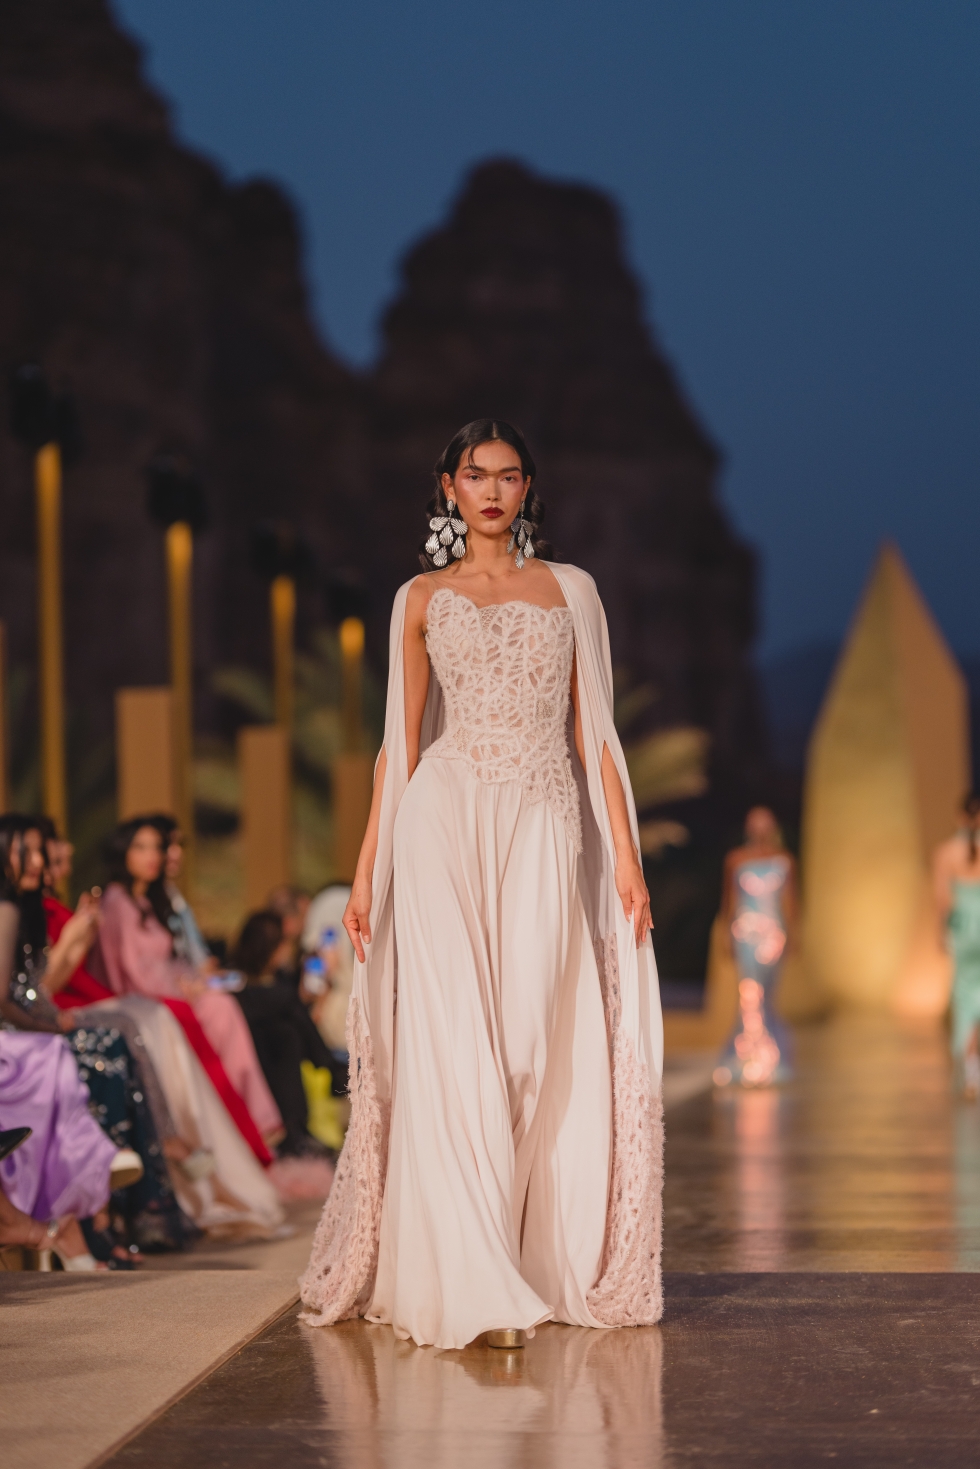 Maison Rami Kadi Unveils “Les Miroirs” Collection in a Breathtaking Show at AlUla